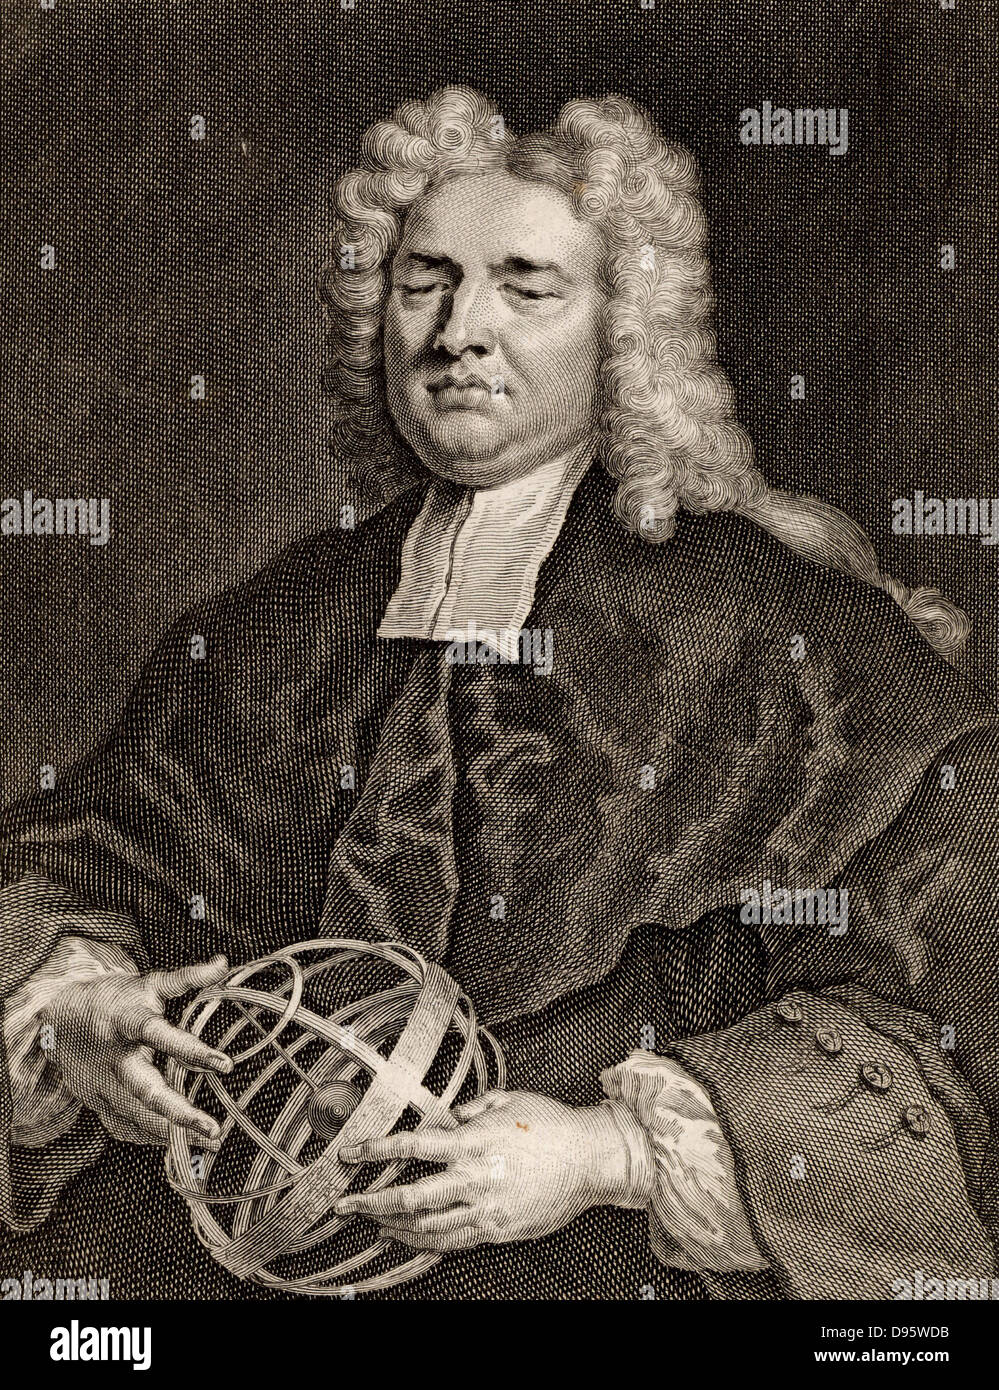 Nicholas Saunderson (1682-1739), English mathematician. Saunderson lost his sight to Smallpox when he was an infant.  He became Lucasian professor of mathematics at Cambridge. He is holding an armillary sphere.  Engraving by Gerard van der Gucht (c1696-1776) after the portrait painted by Vanderbank in 1718. Stock Photo